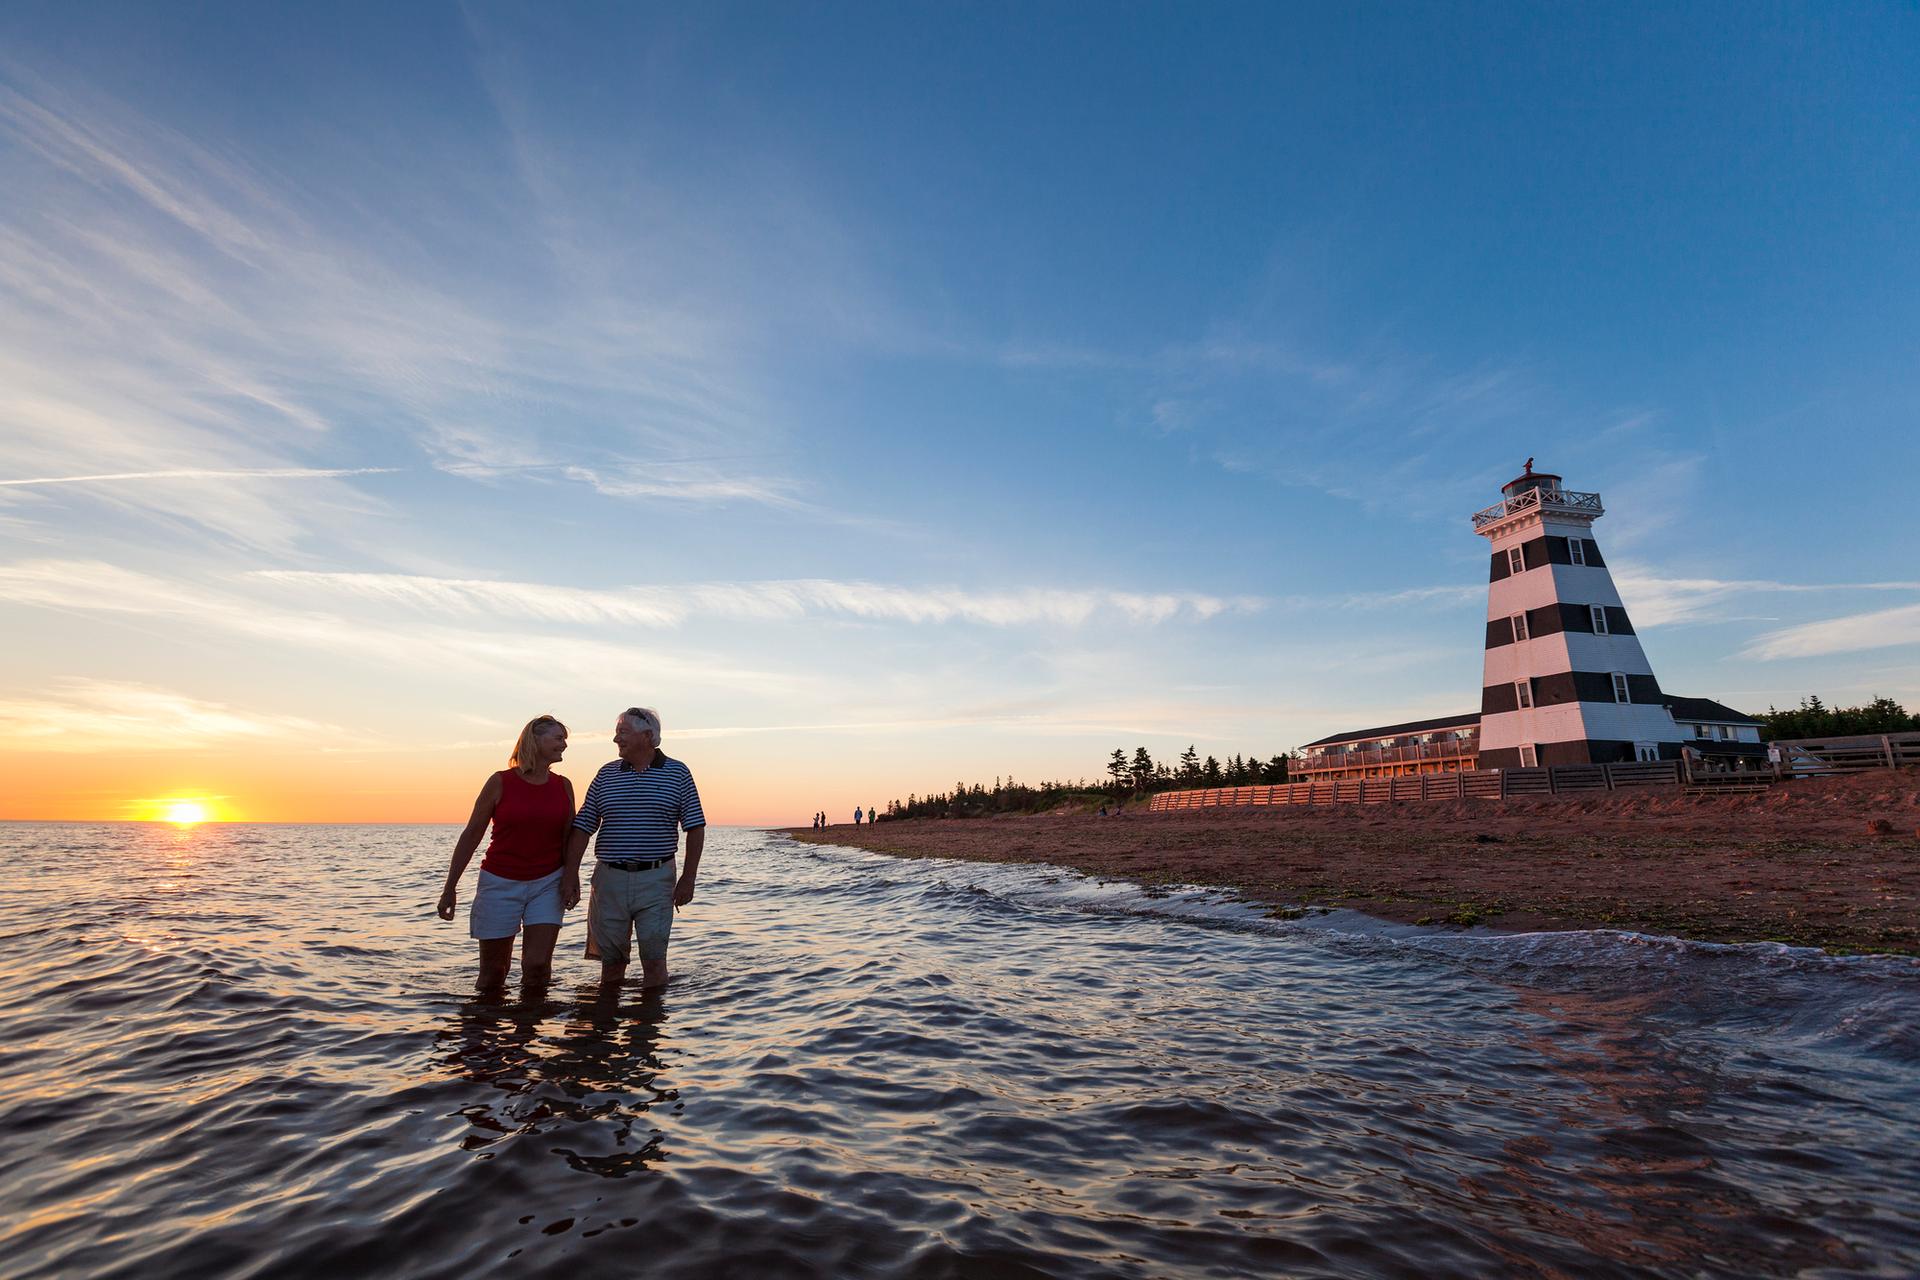 Two people walk in the waters at a Prince Edward Island beach, in view of a lighthouse